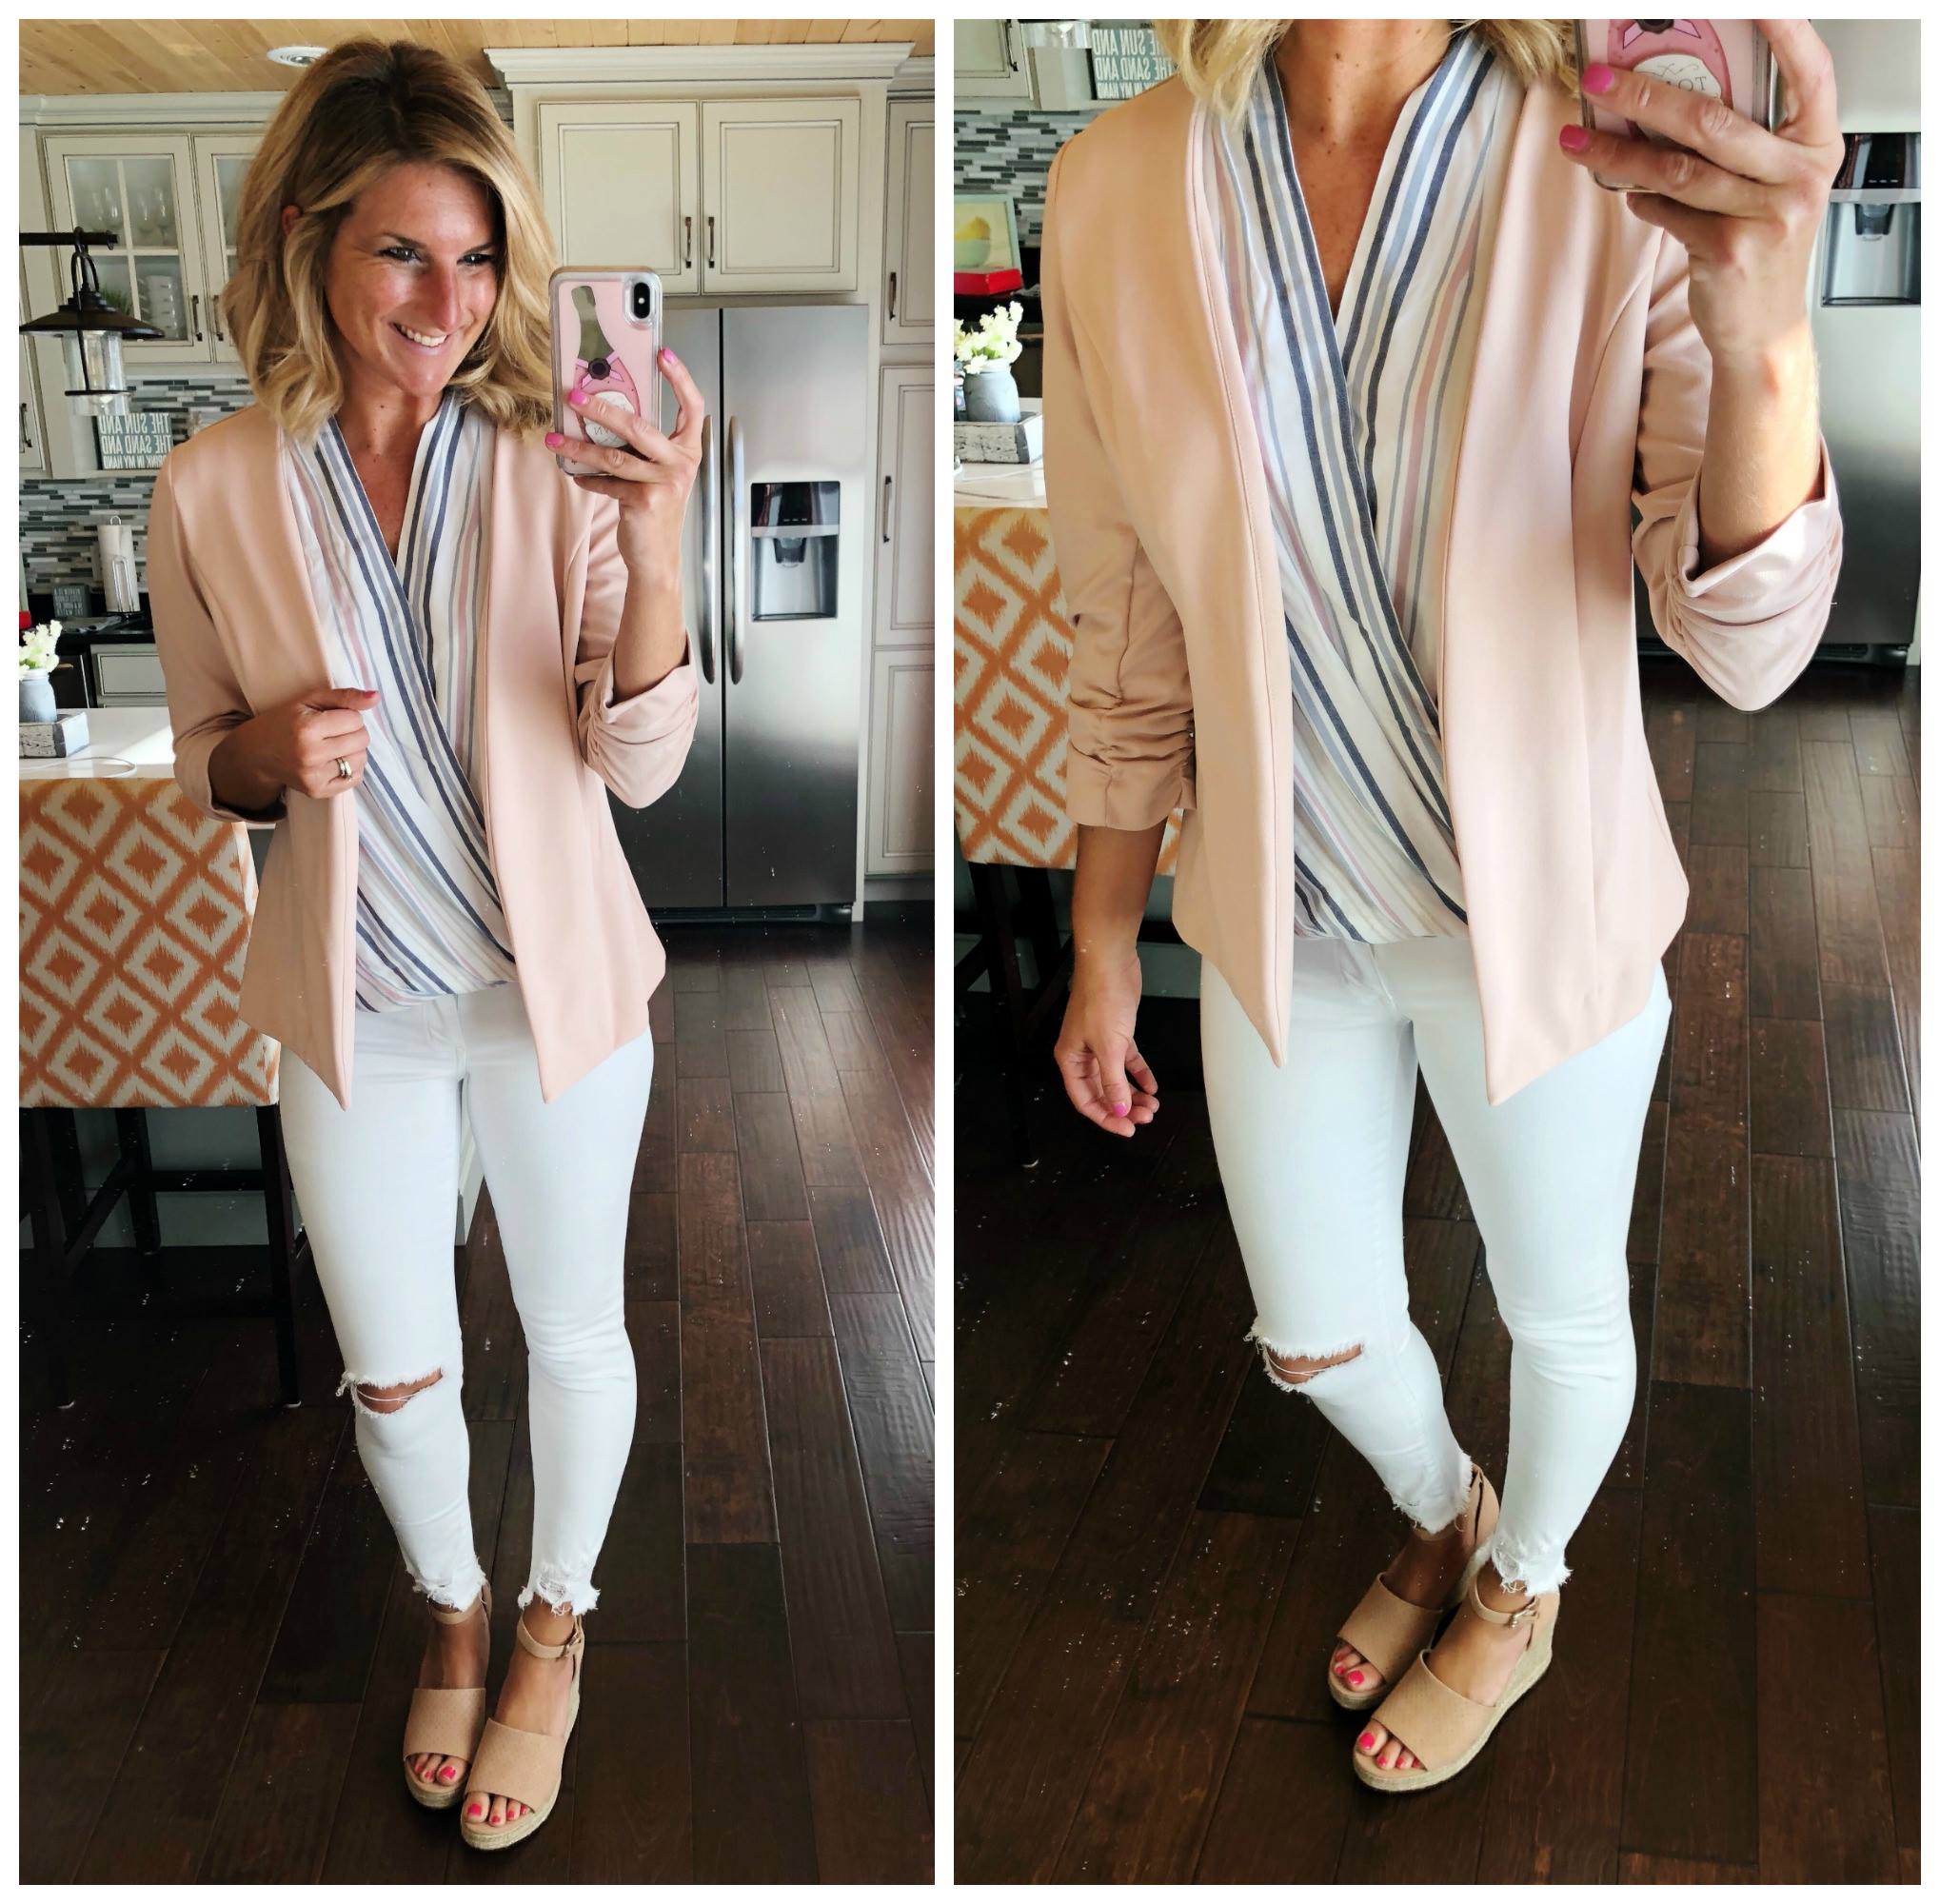 Work Wear Outfit Inspiration // Wrap Top and white jeggings with blush blazer // Outfit of the day